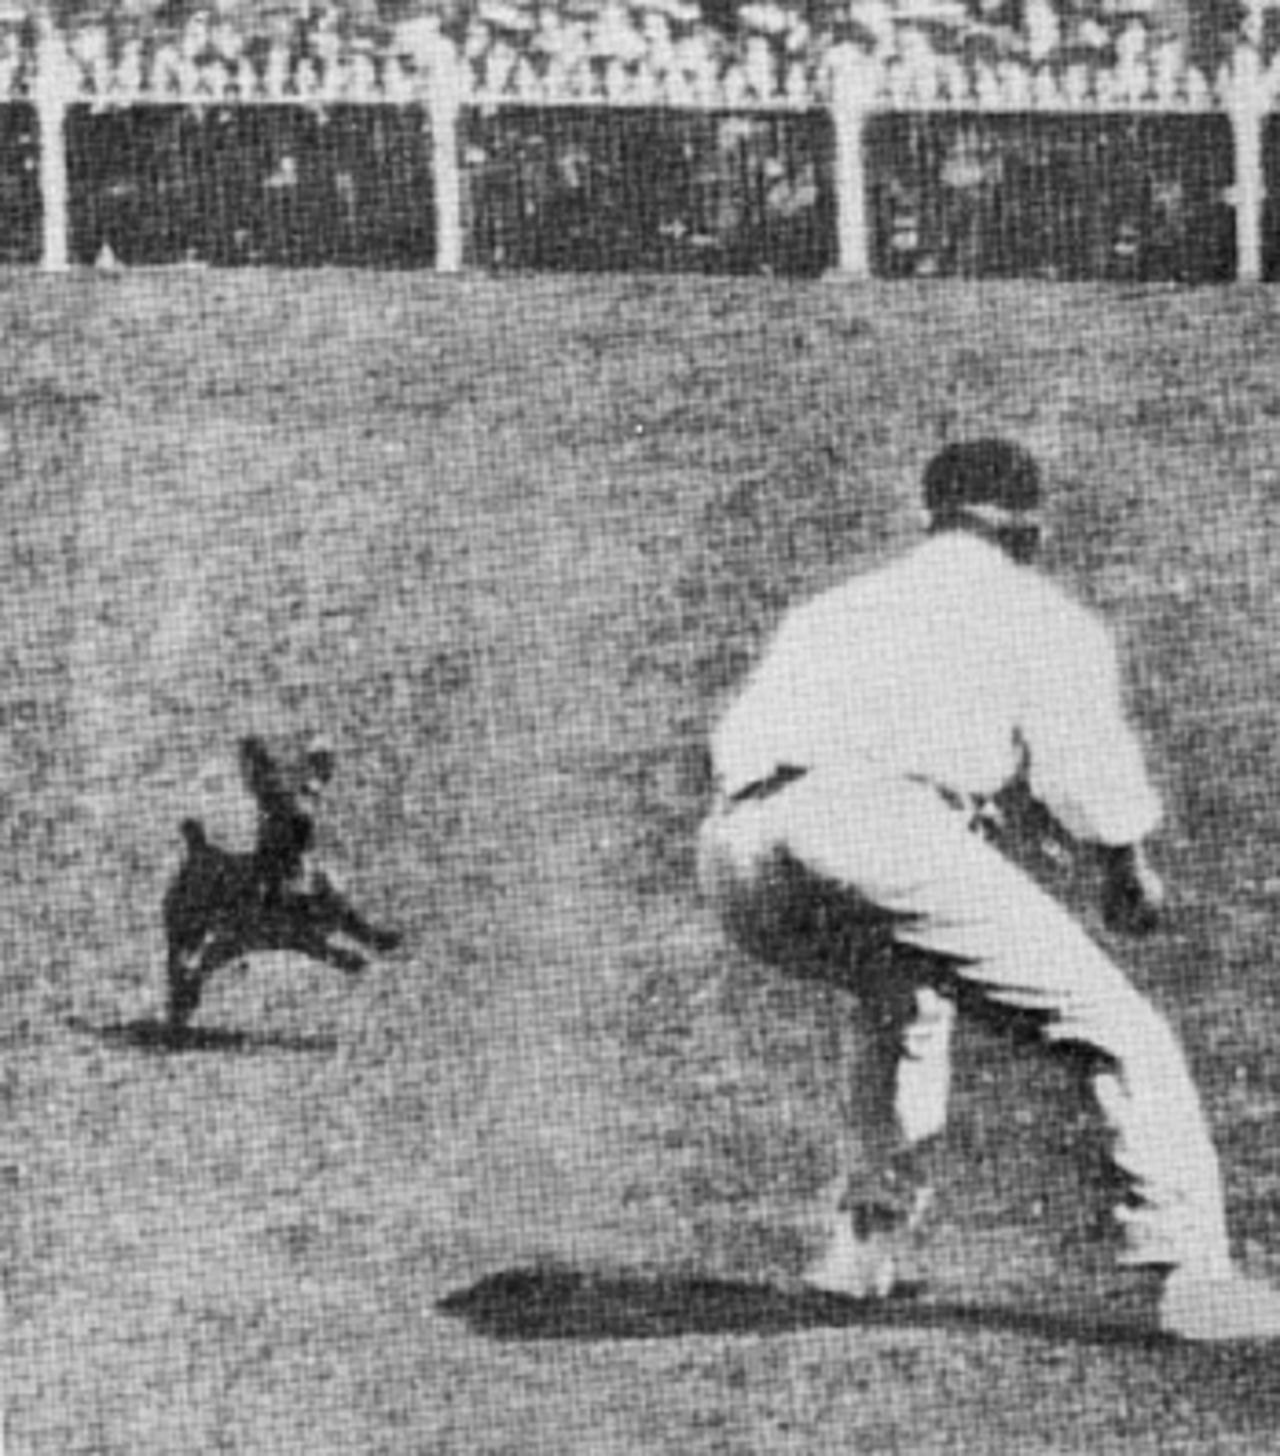 Clem Hill tries to catch an invading dog during the fourth Test at Melbourne, February 7, 1908